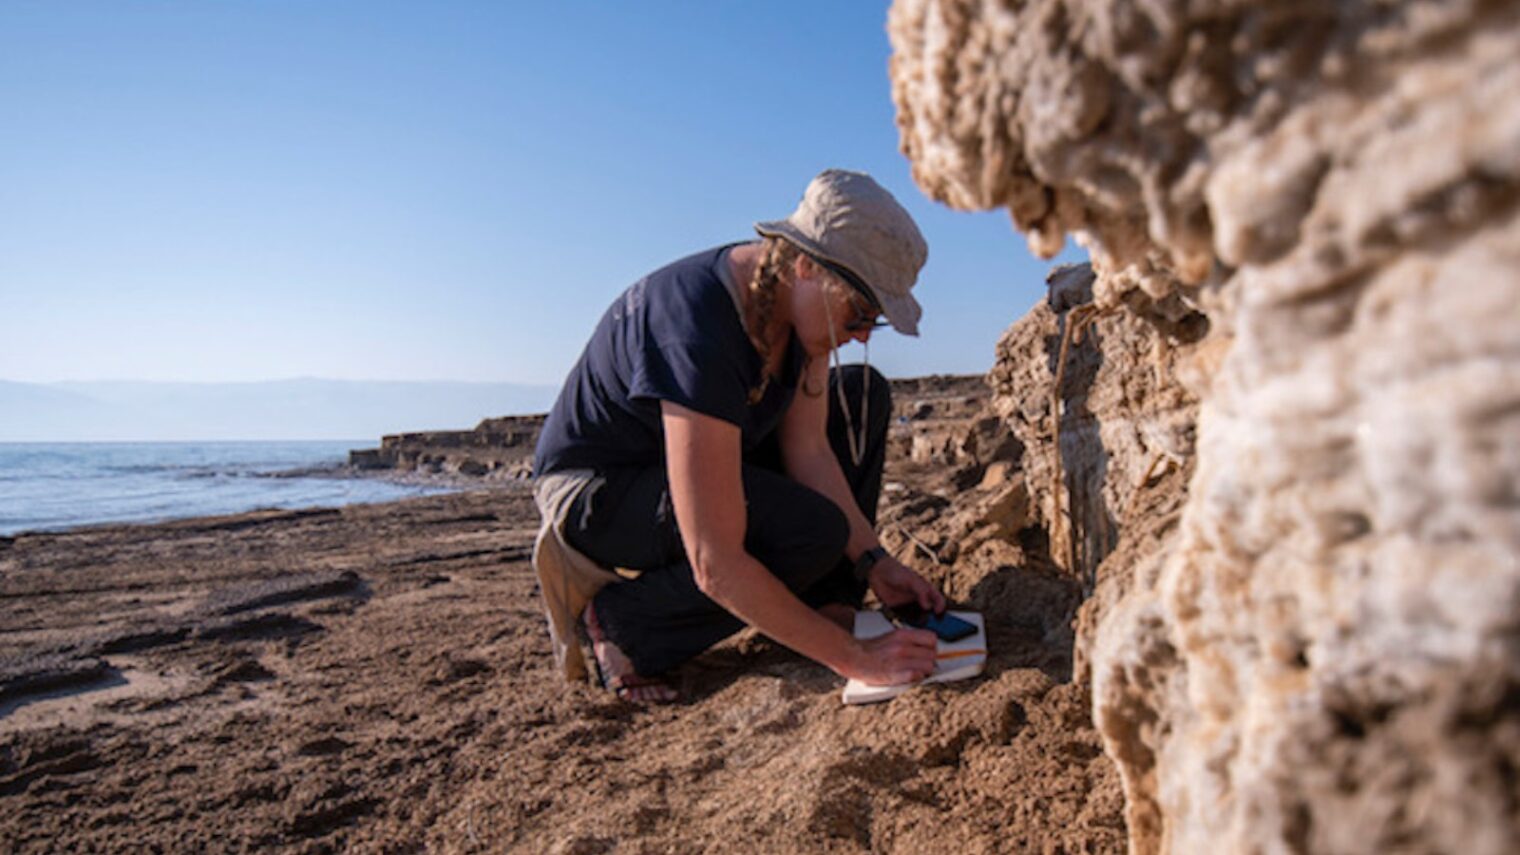 The University of Haifaâ€™s Dr. Beverly Goodman examines soil layers exposed by the retreat of the Dead Sea. Photo by Hagai Nativ/Morris Kahn Marine Research Station of University of Haifa